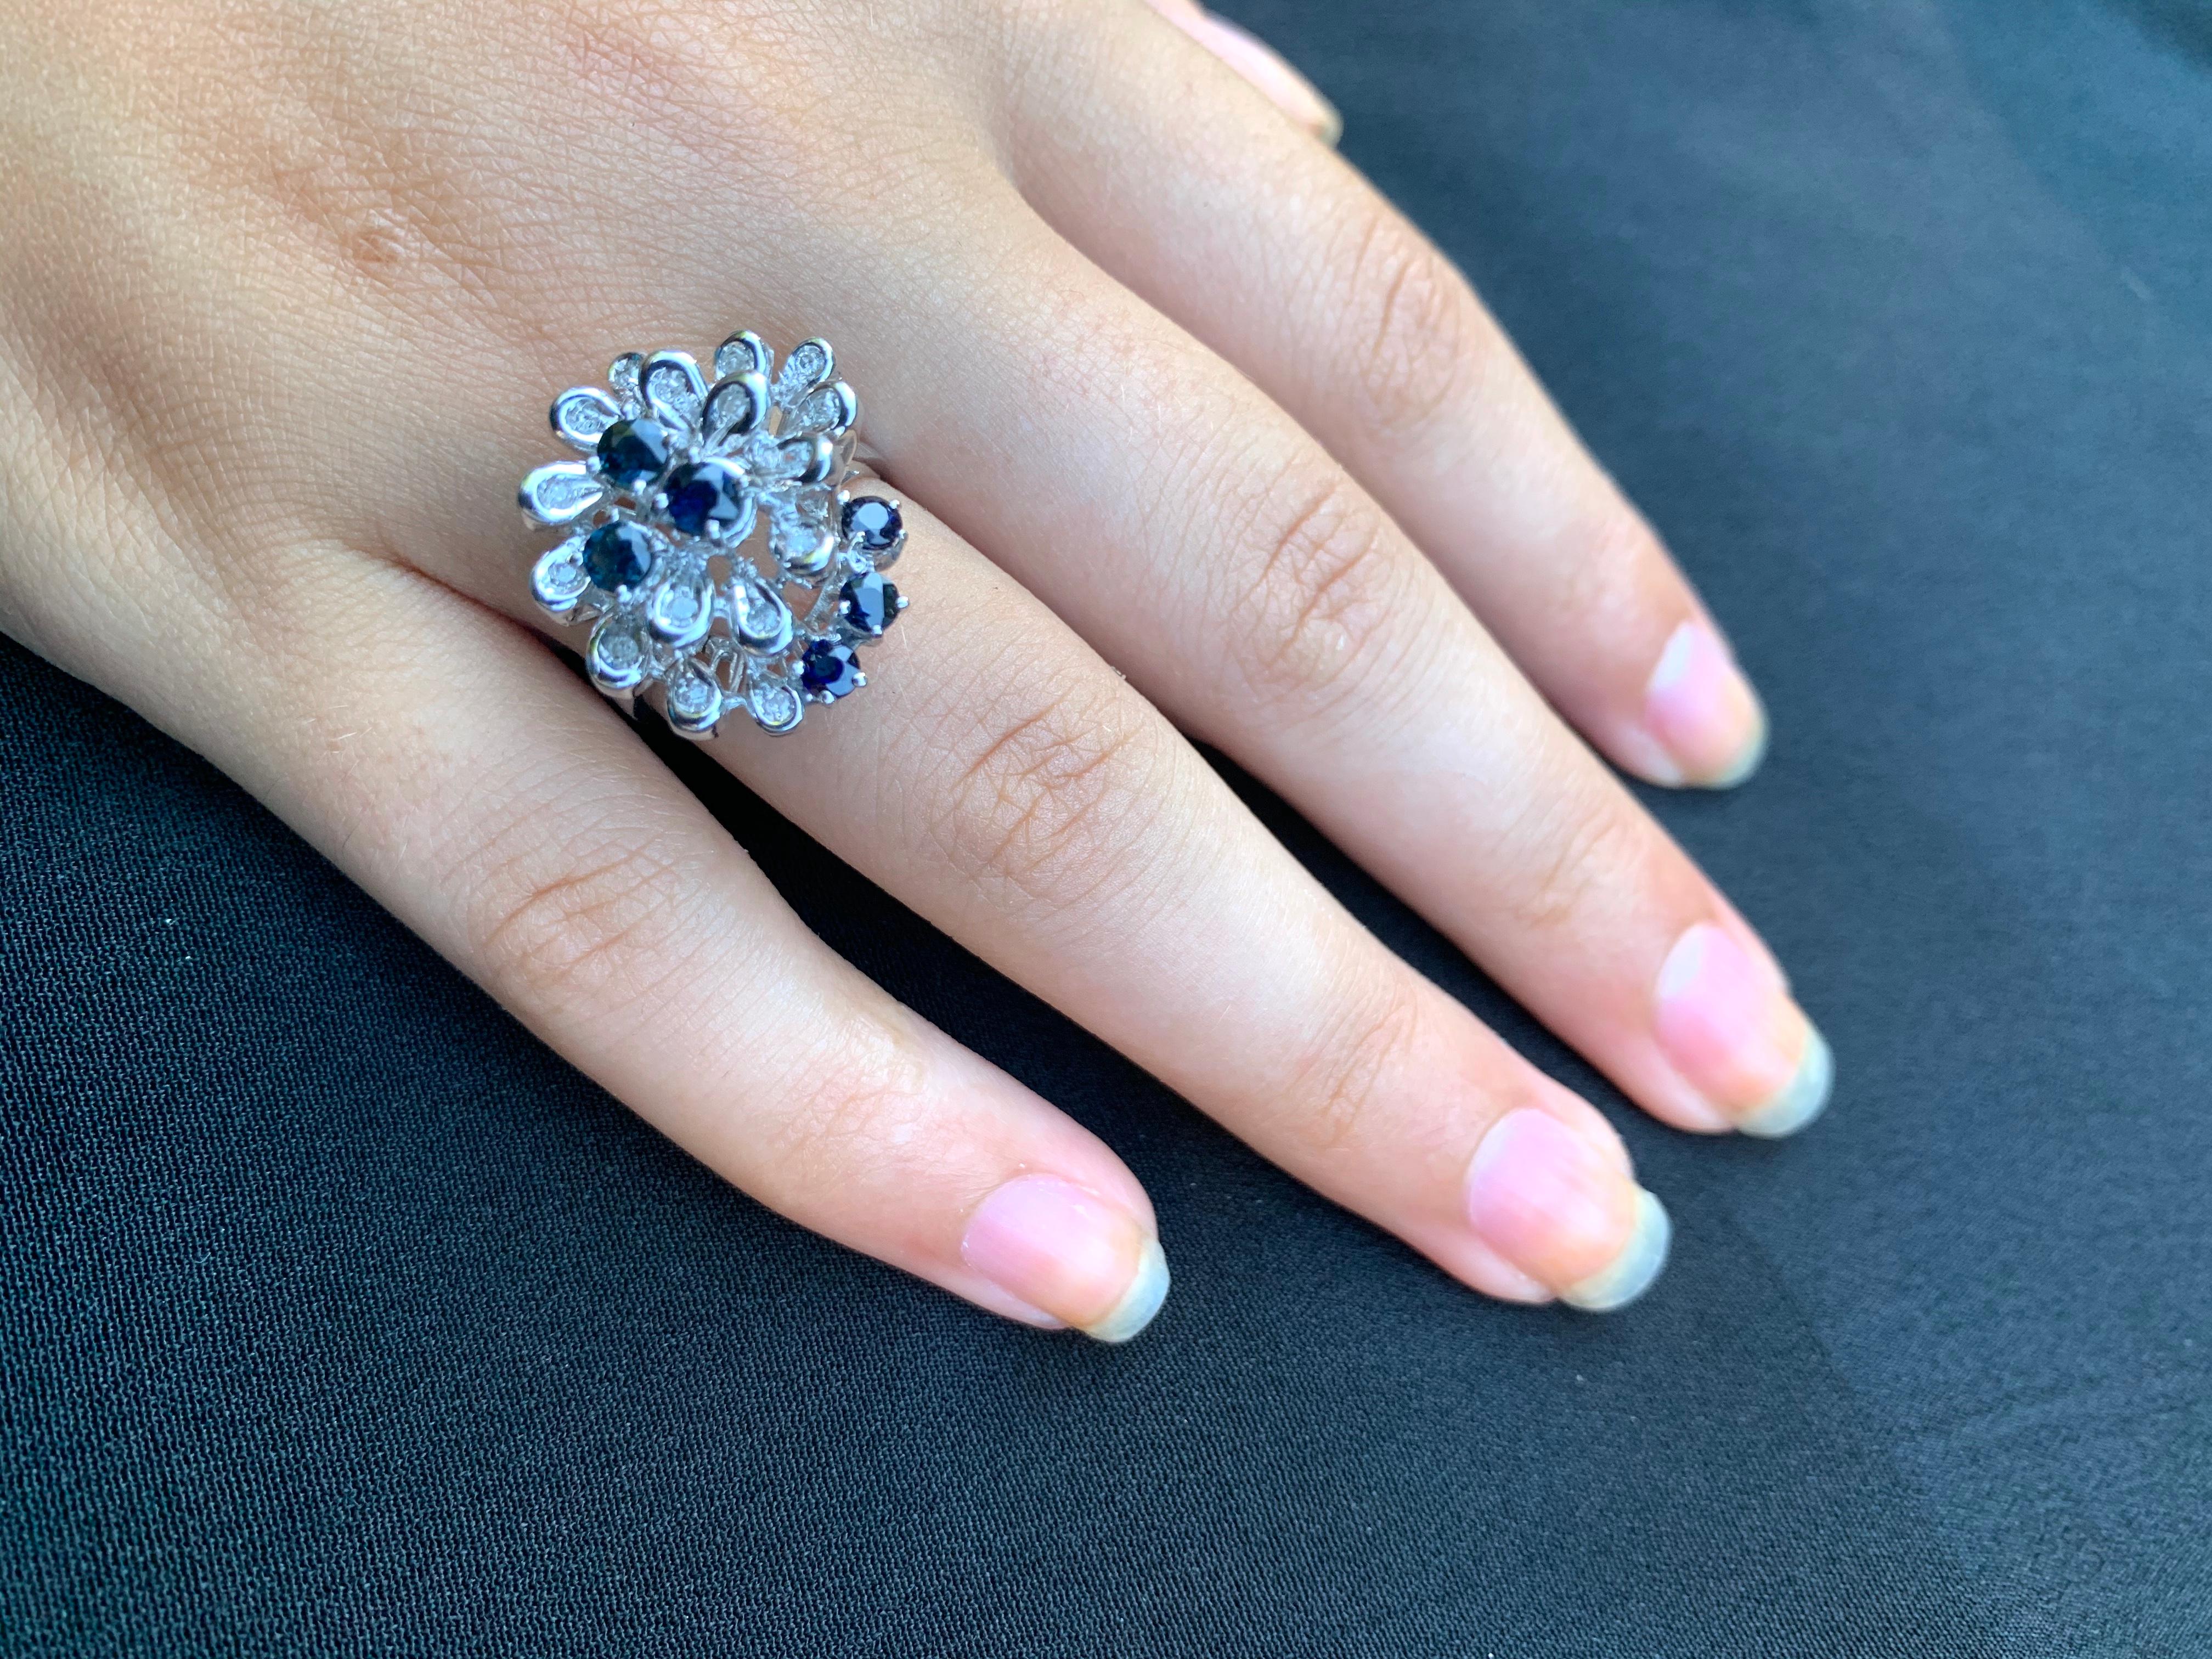 Beautiful, large, modernist style flower form 18K white gold cocktail ring featuring fifteen diamonds and six deep blue sapphires.  
Second half of 20th century.
marked 750 for 18K gold and Italy on the interior of band 
Very good condition
Size